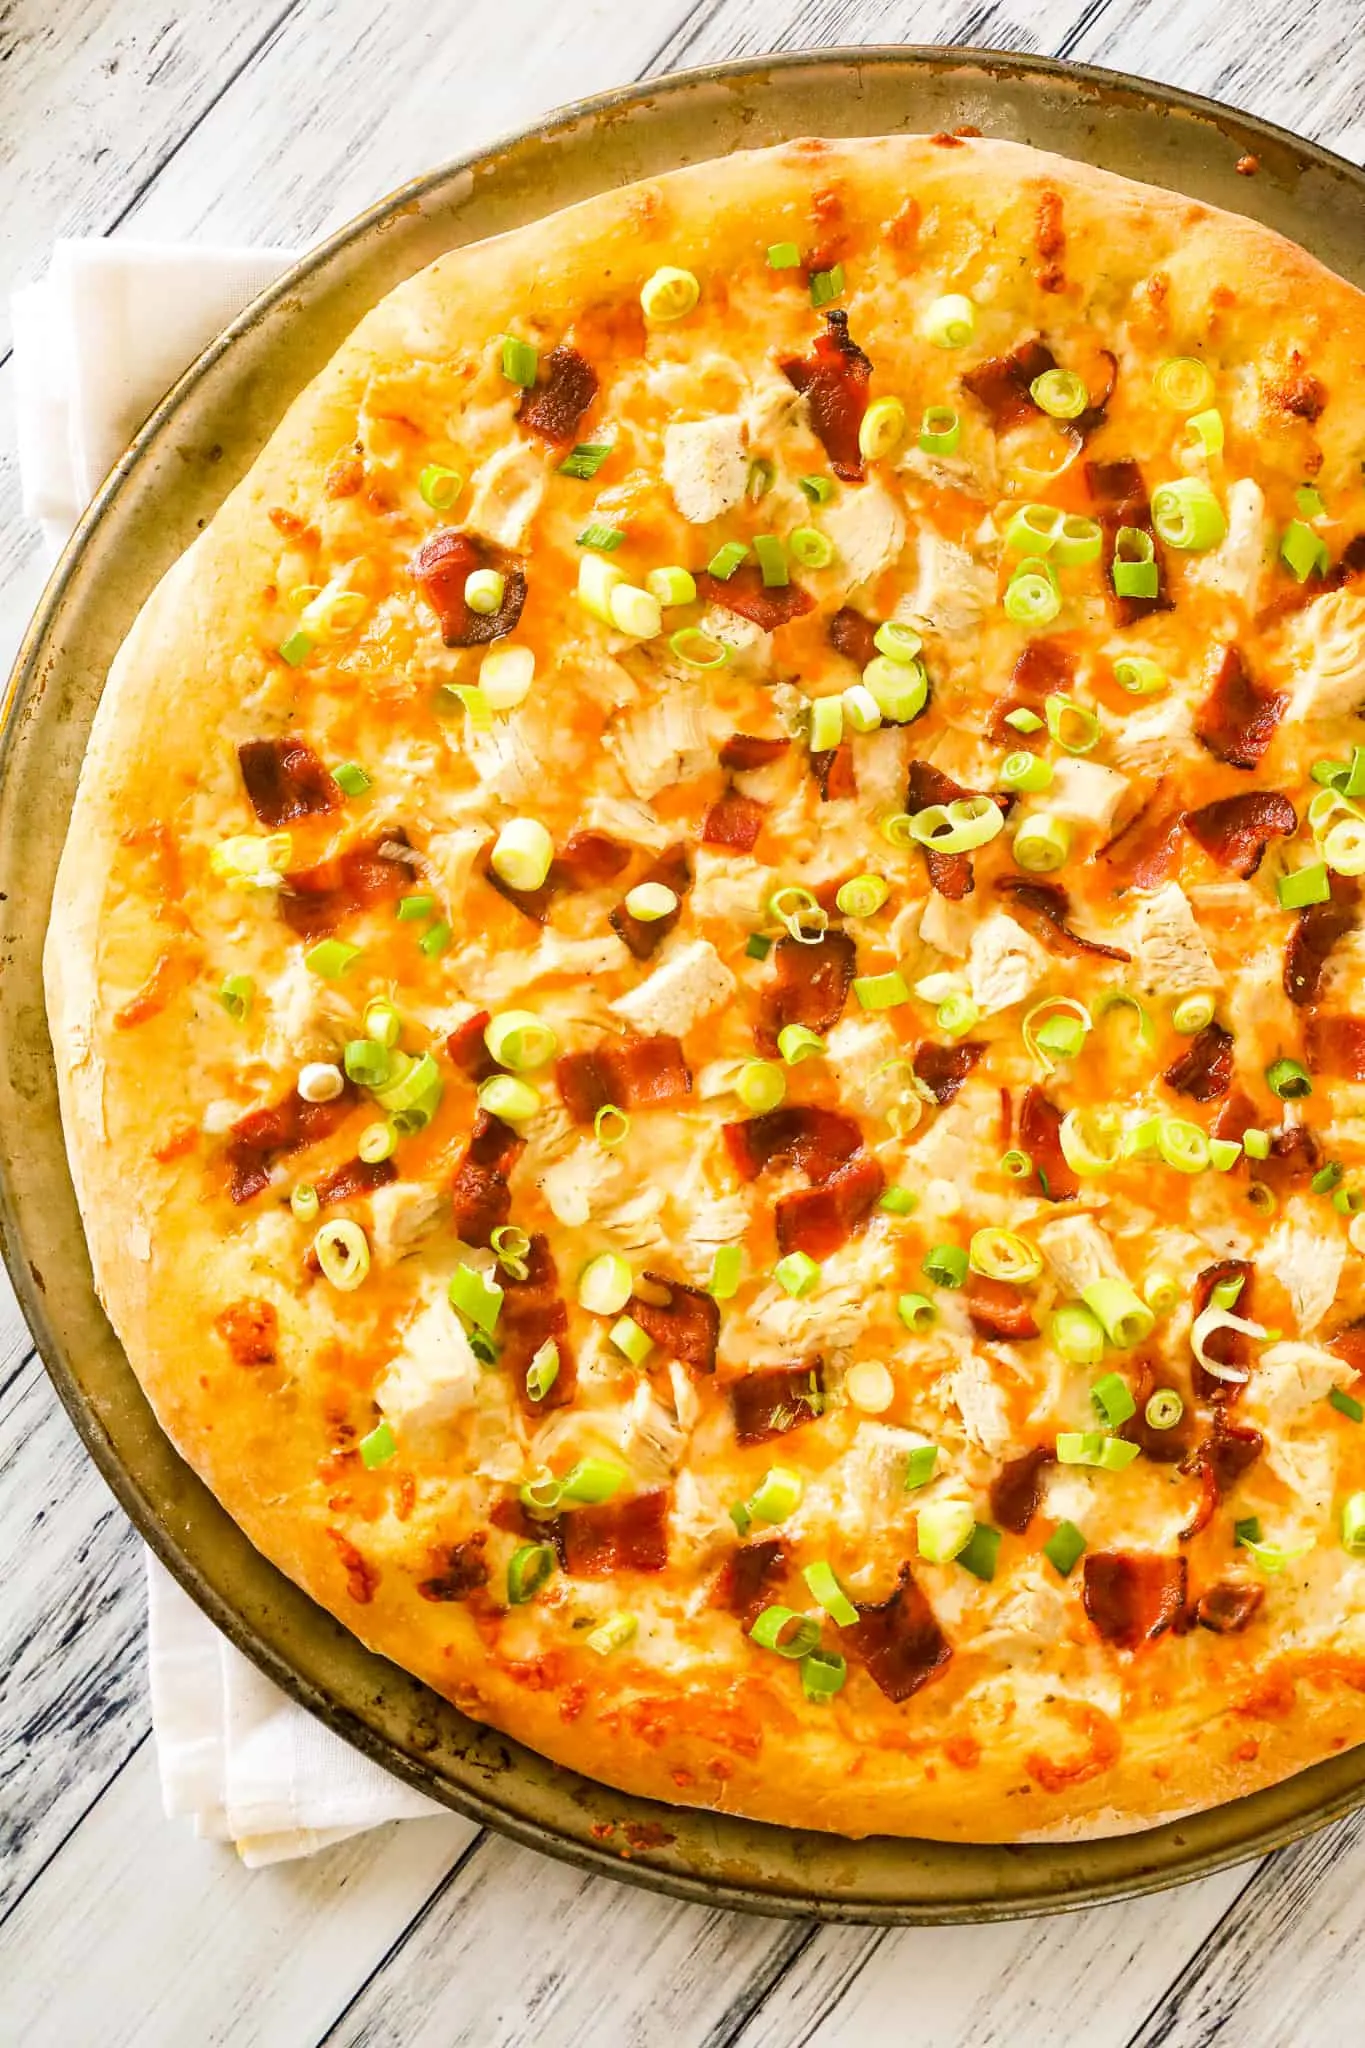 Chicken Bacon Ranch Pizza is an easy dinner recipe using store bought pizza dough loaded with ranch dressing, chicken breast chunks, bacon, chopped green onions and shredded mozzarella and cheddar cheese.